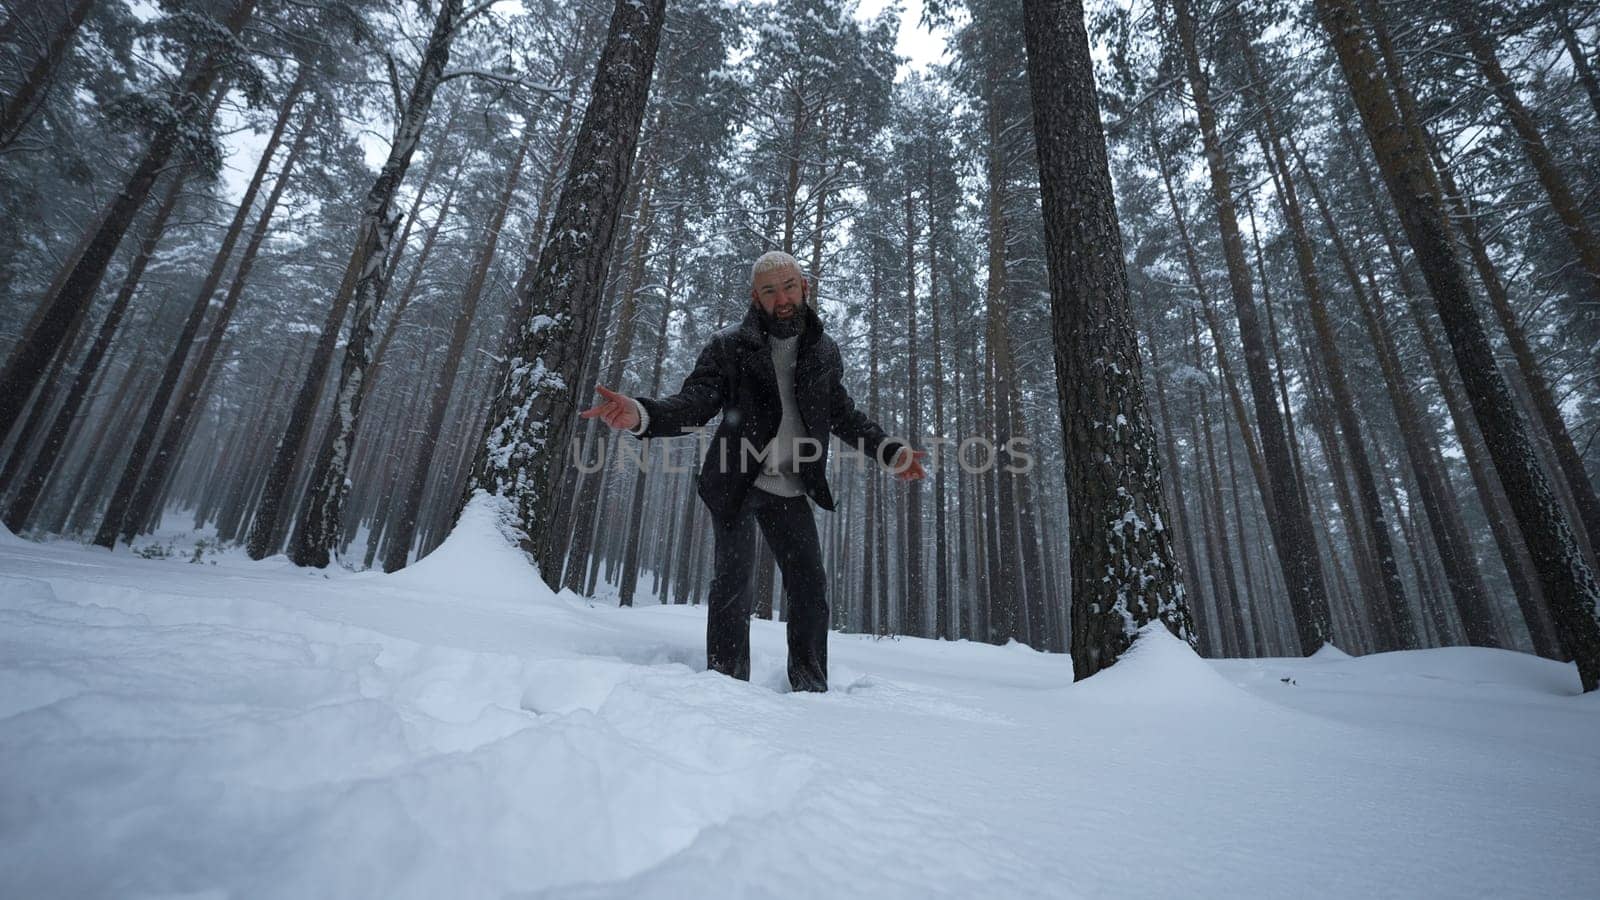 Man dancing in winter forest. Media. Stylish man is rapping in winter forest. Shooting music video with rapper in winter forest.